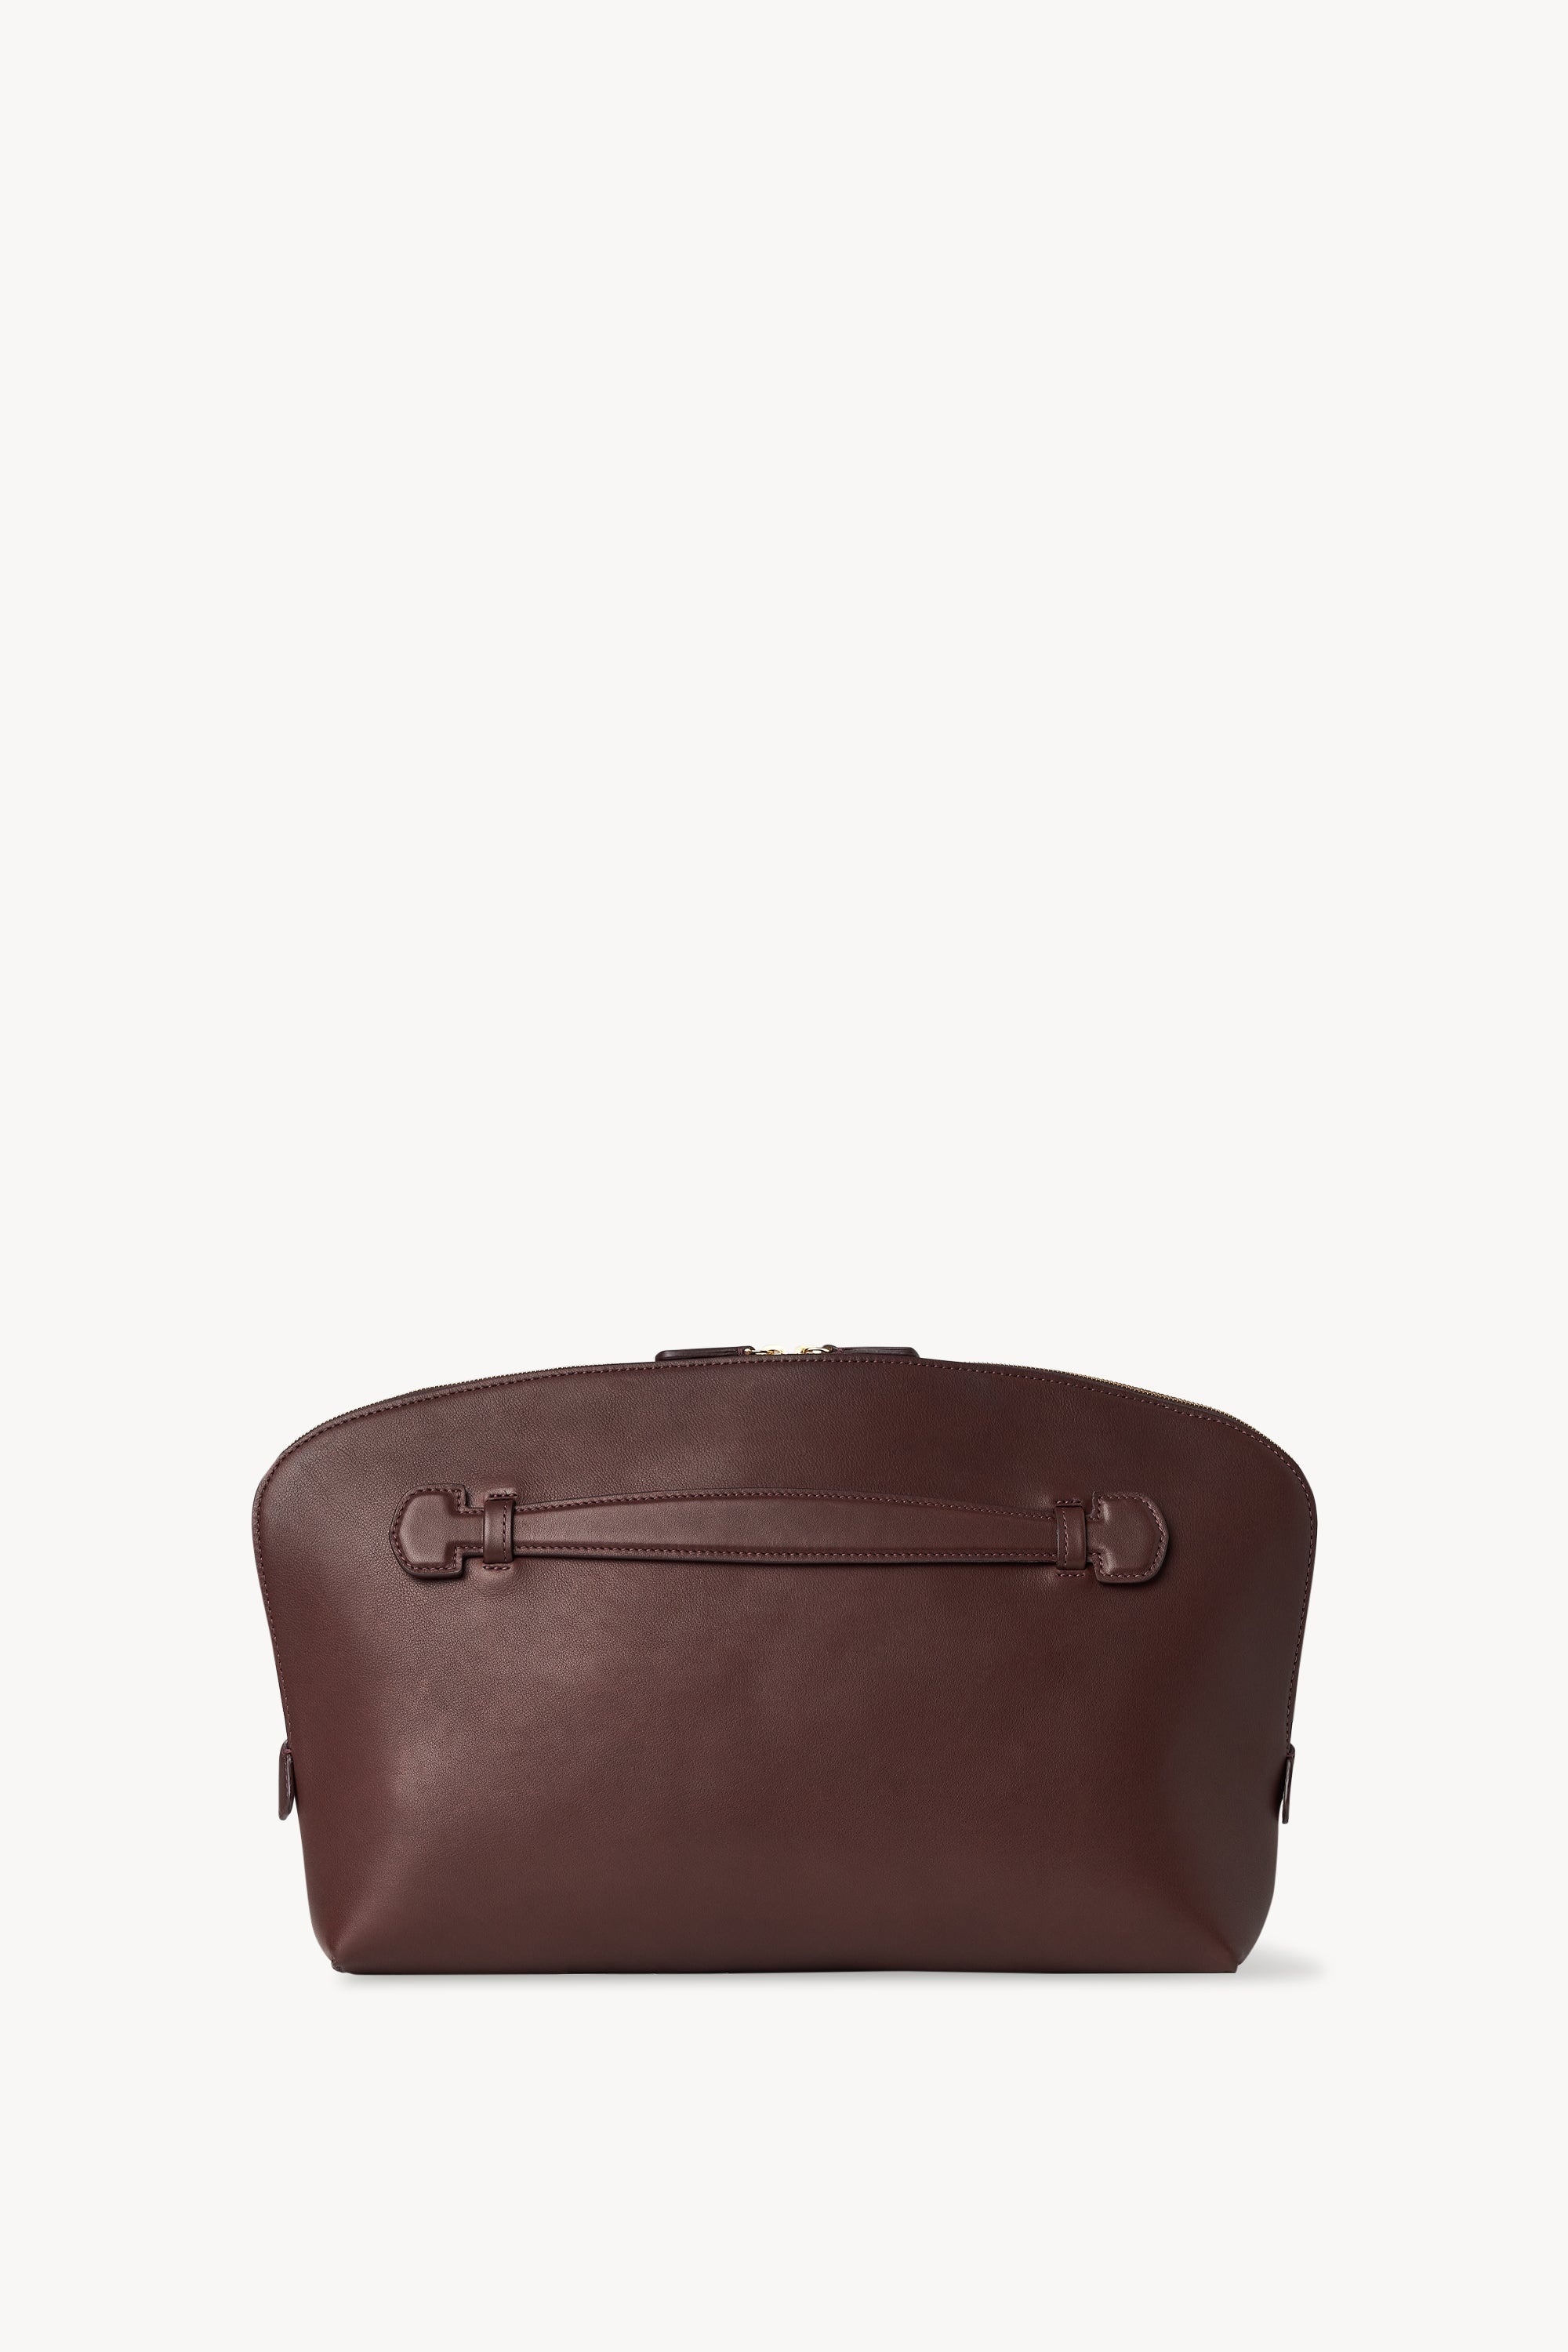 Ellie Clutch in Leather - 1